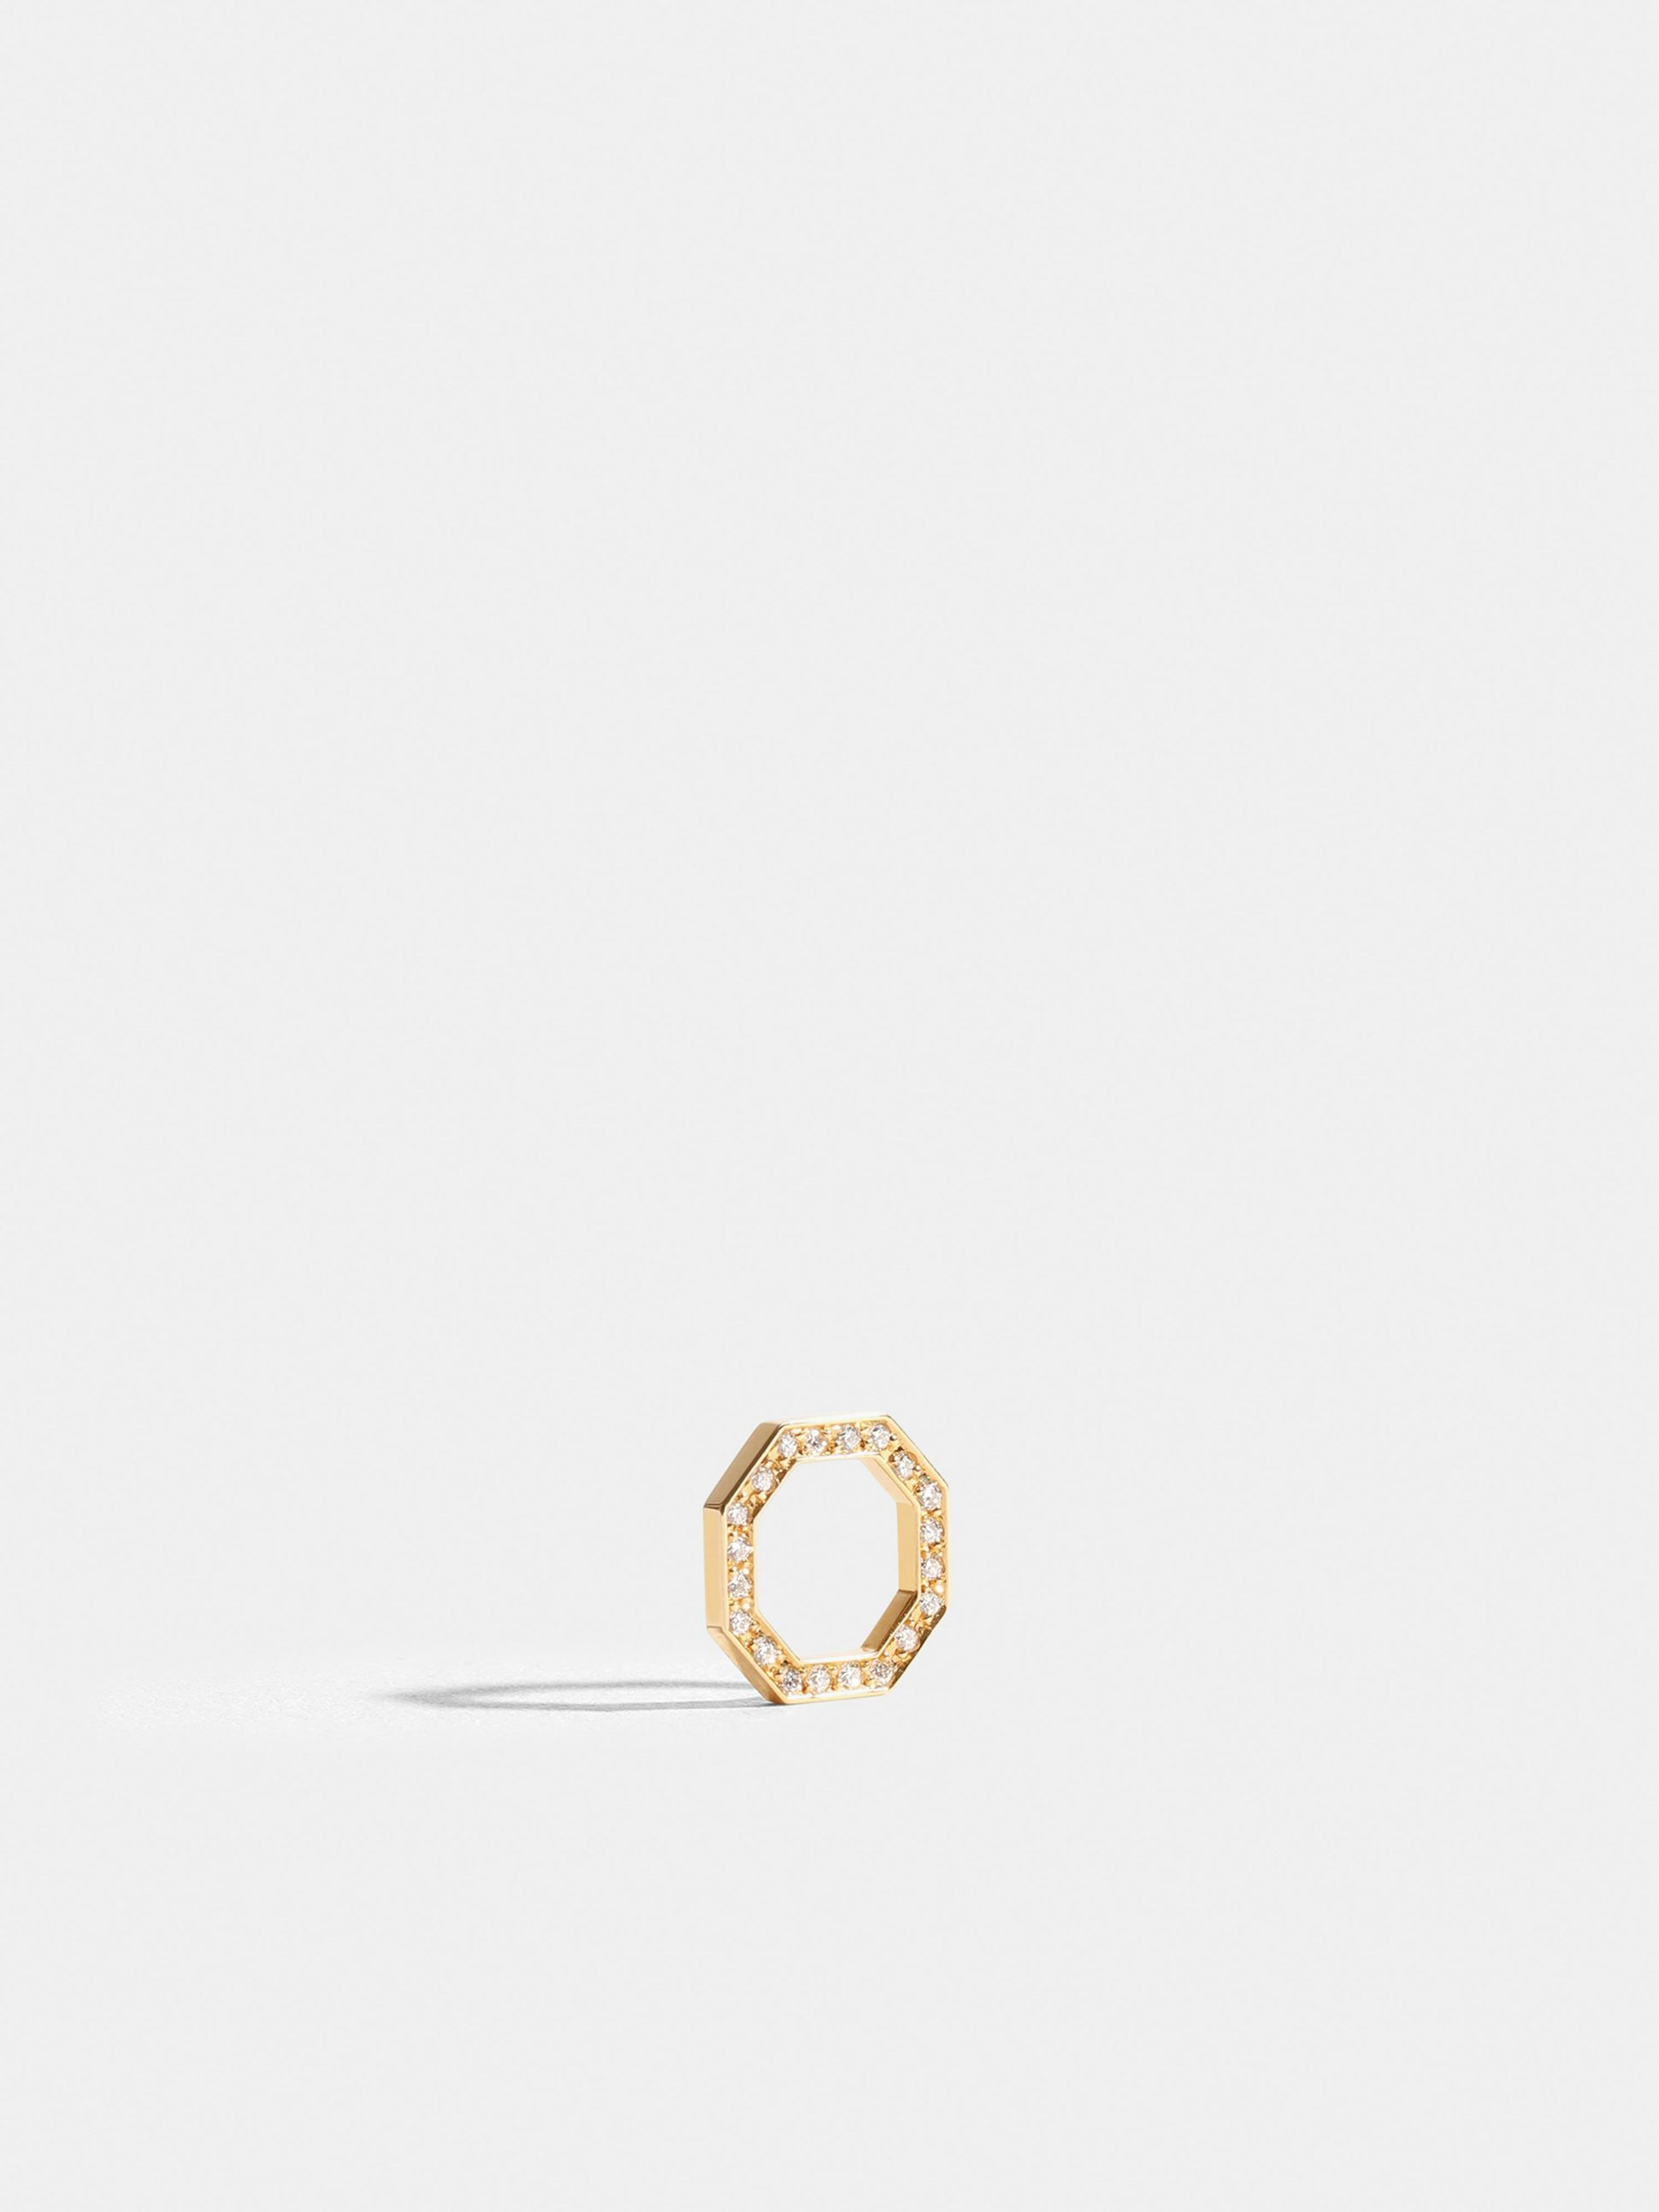 Octogone motif in 18k Fairmined ethical yellow gold, paved with lab-grown diamonds, on honey yellow.